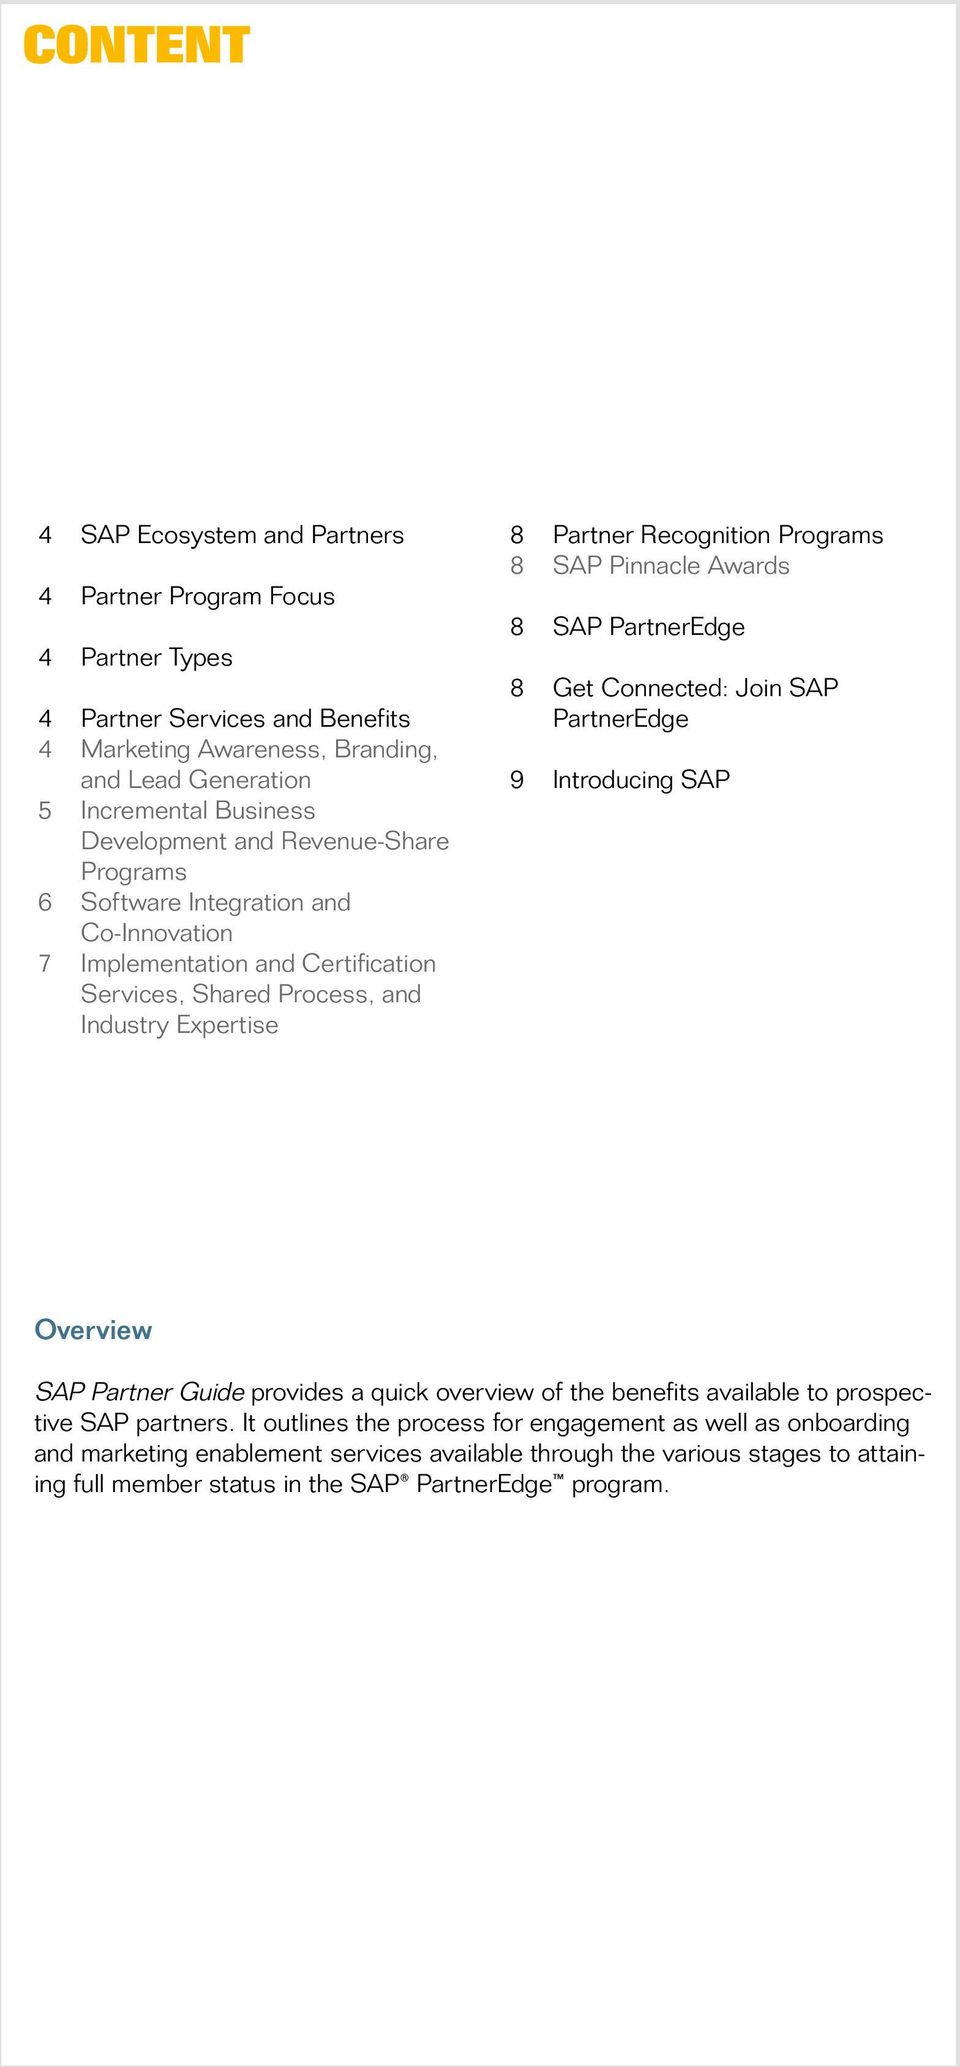 8 SAP Pinnacle Awards 8 SAP PartnerEdge 8 Get Connected: Join SAP PartnerEdge 9 Introducing SAP Overview SAP Partner Guide provides a quick overview of the benefits available to prospective SAP